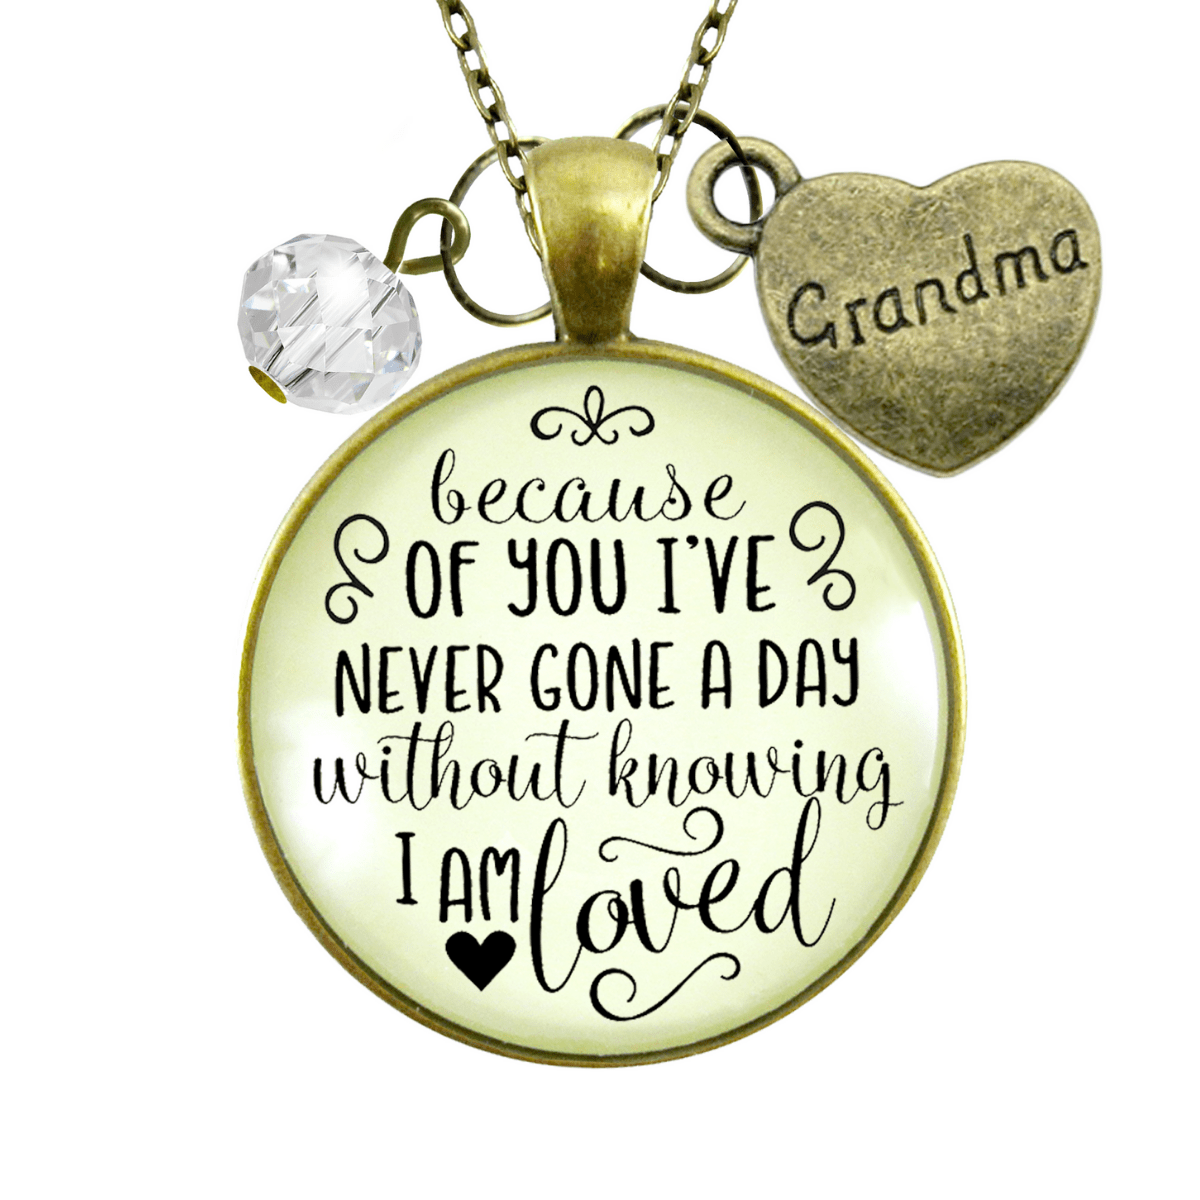 Gutsy Goodness Grandma Necklace Because of Your Love Heart Grandmother Jewelry - Gutsy Goodness Handmade Jewelry;Grandma Necklace Because Of Your Love Heart Grandmother Jewelry - Gutsy Goodness Handmade Jewelry Gifts